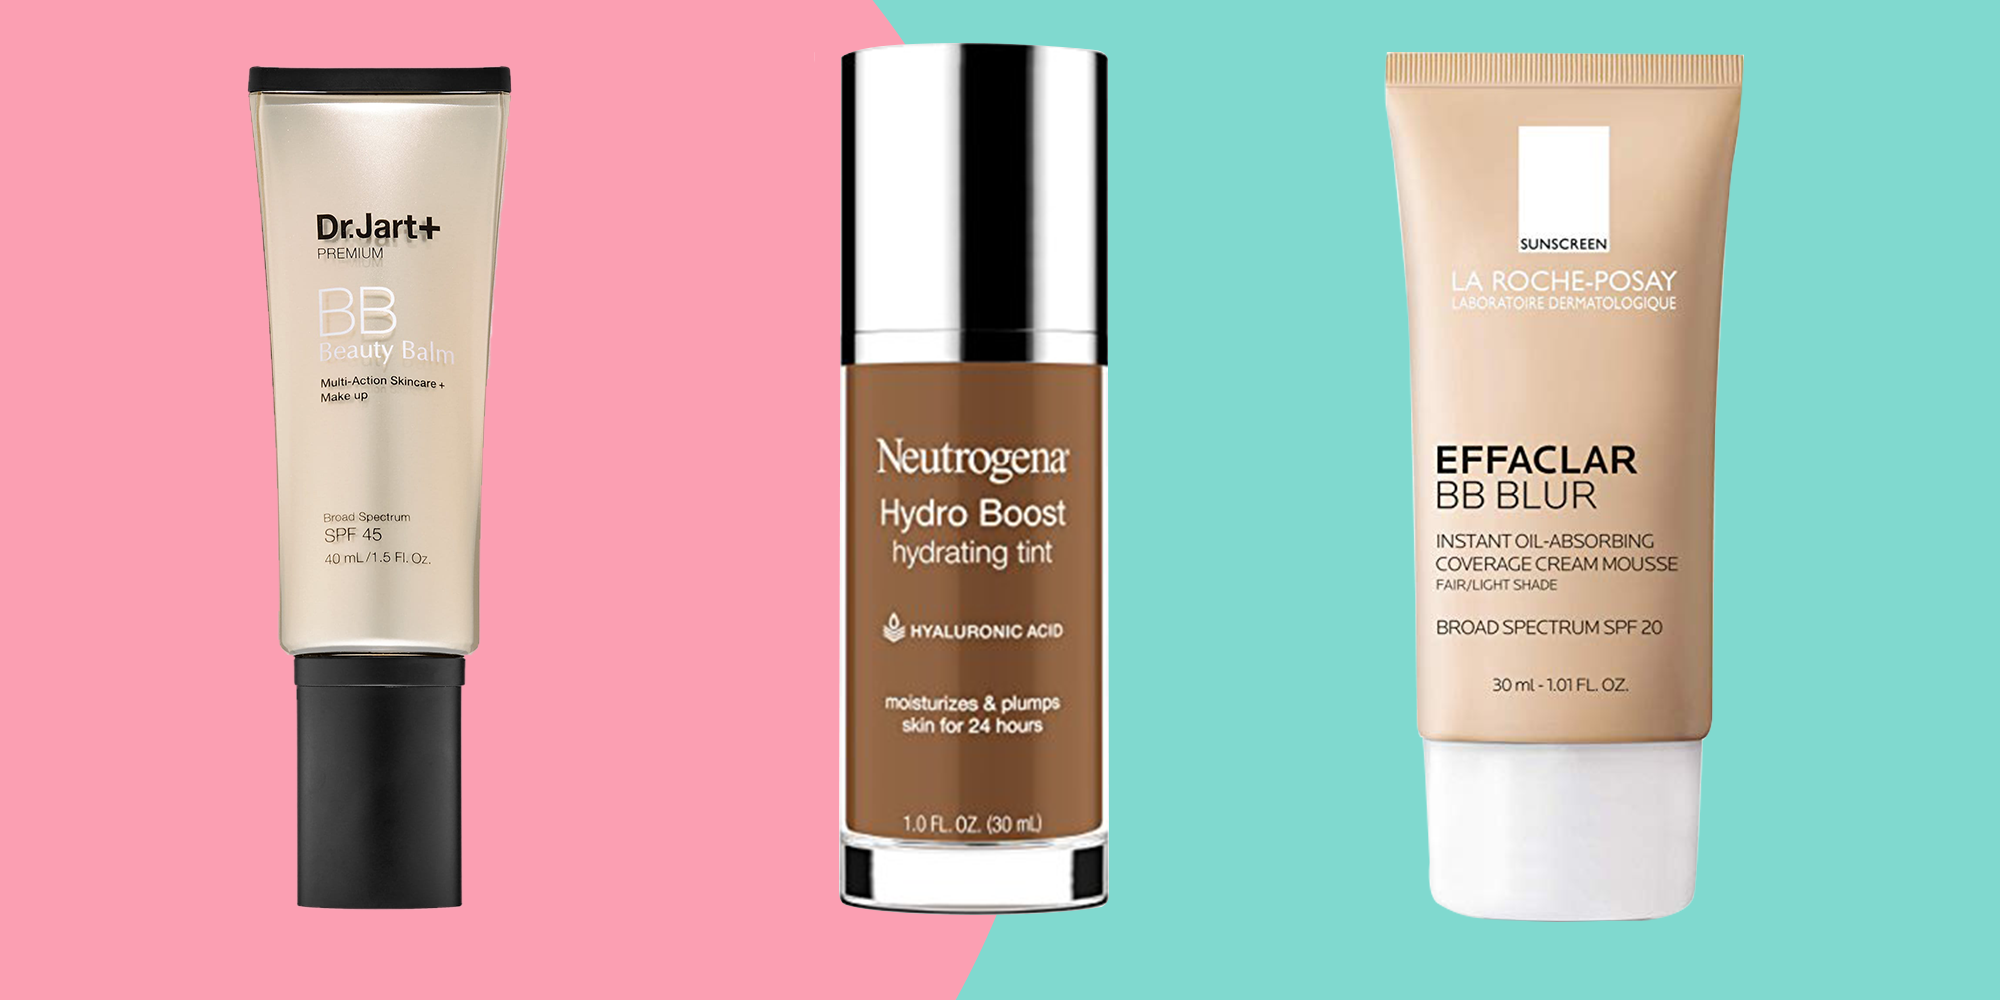 17 Best Bb Creams 2020 Top Bb Creams For Every Skin Type If you have never used it before, though, you could get a small amount onto the palm of one hand. top bb creams for every skin type